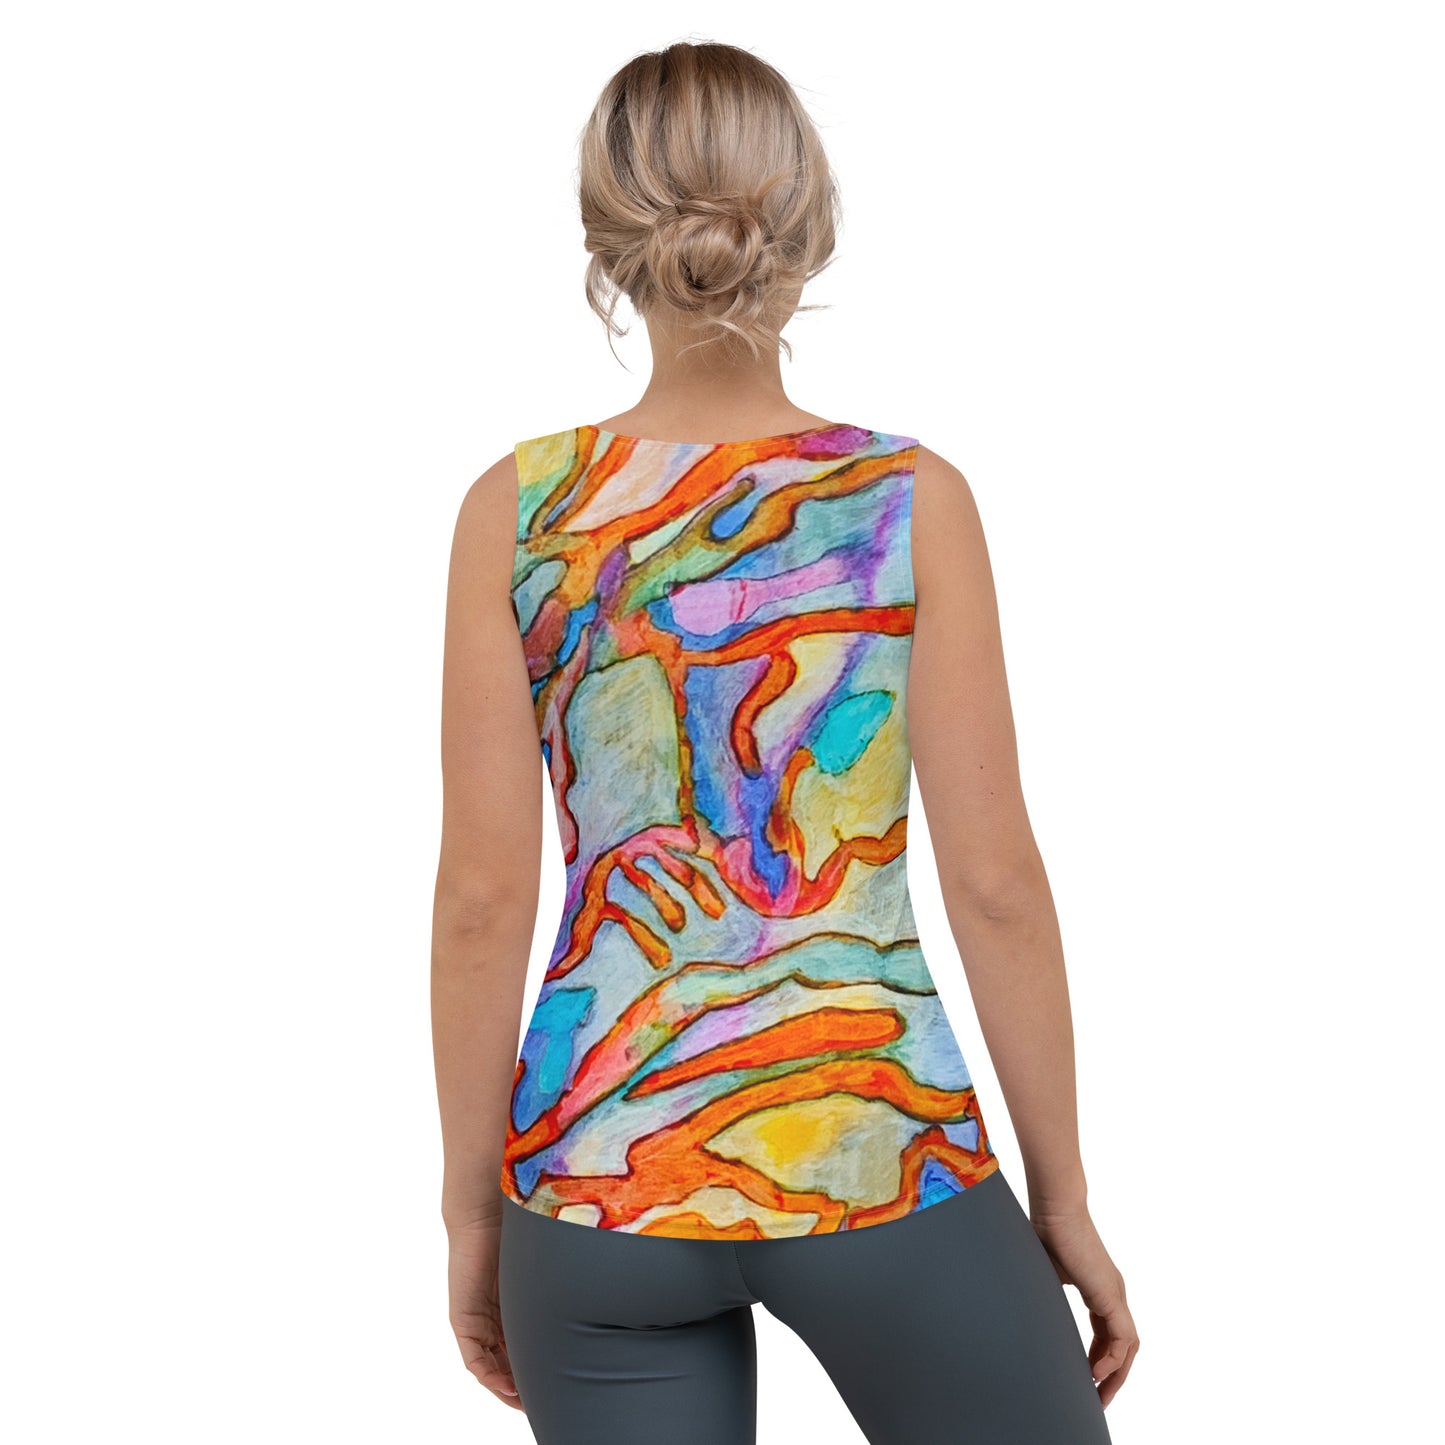 Coral Reef Abstract Tank Top - Art Love Decor